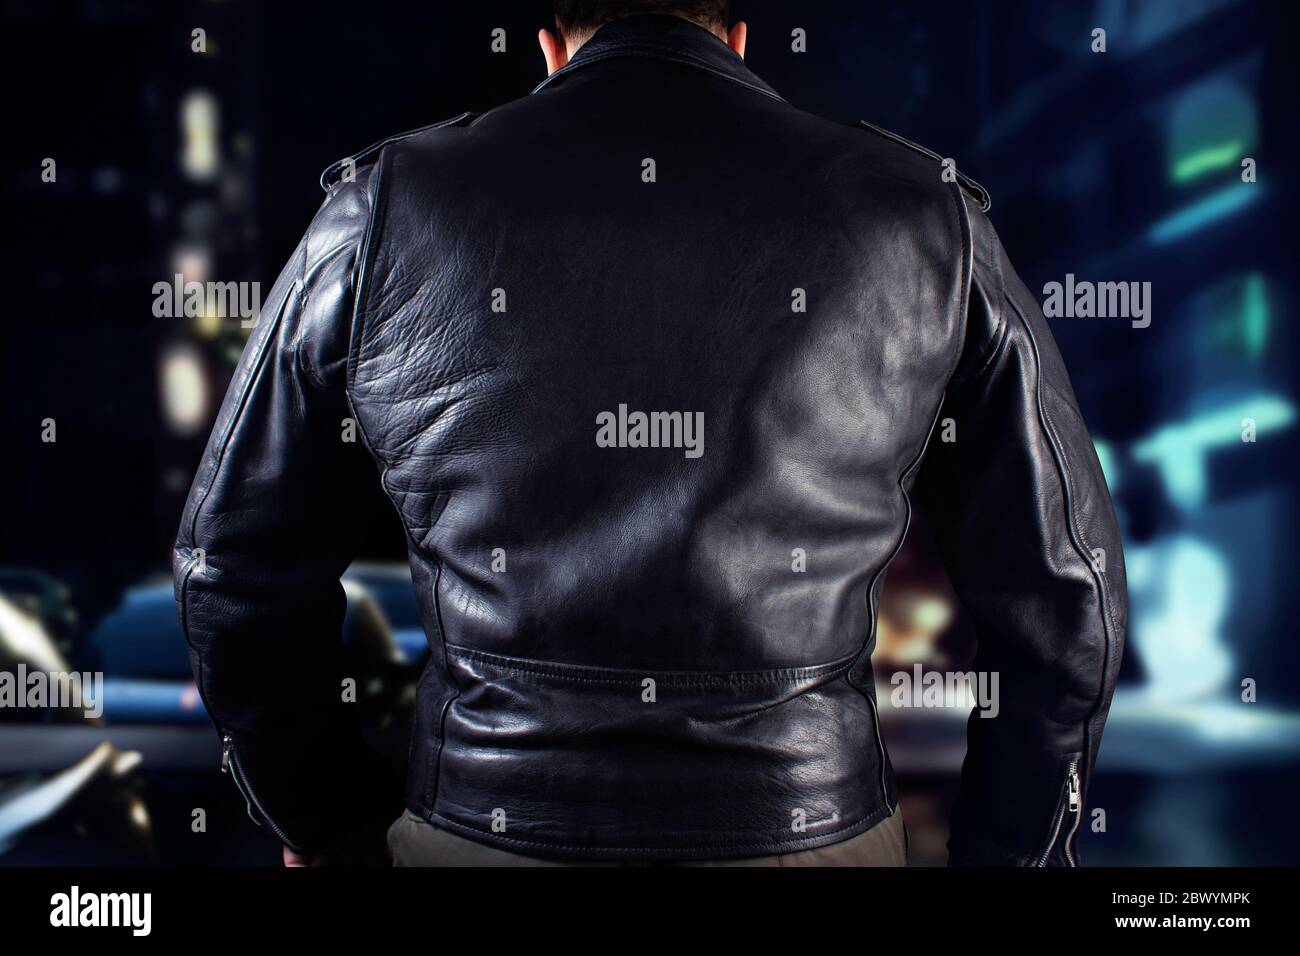 Closeup photo of a man in black leather biker jacket standing on black background. Stock Photo